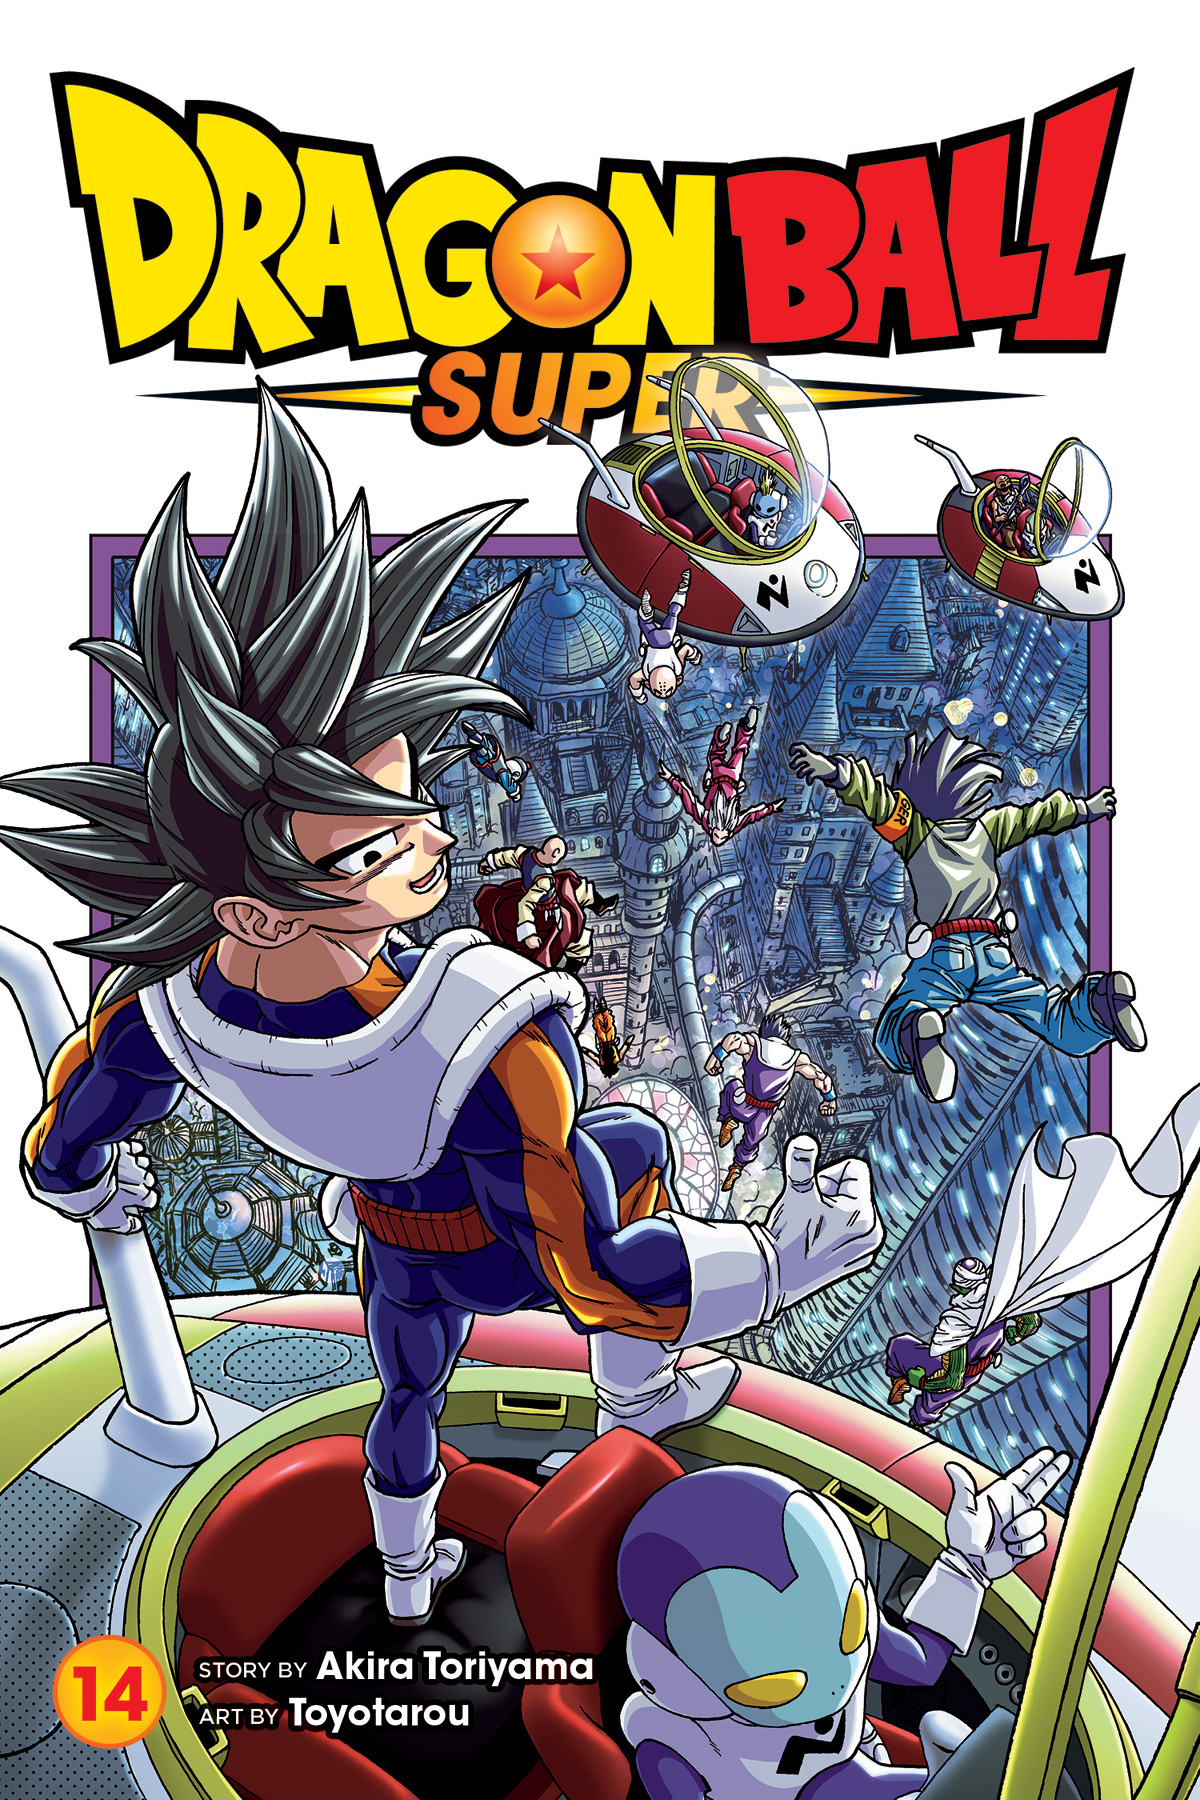 Dragon Ball Super Chapter 75 | Upcoming Plot | Release Date| Release Time|